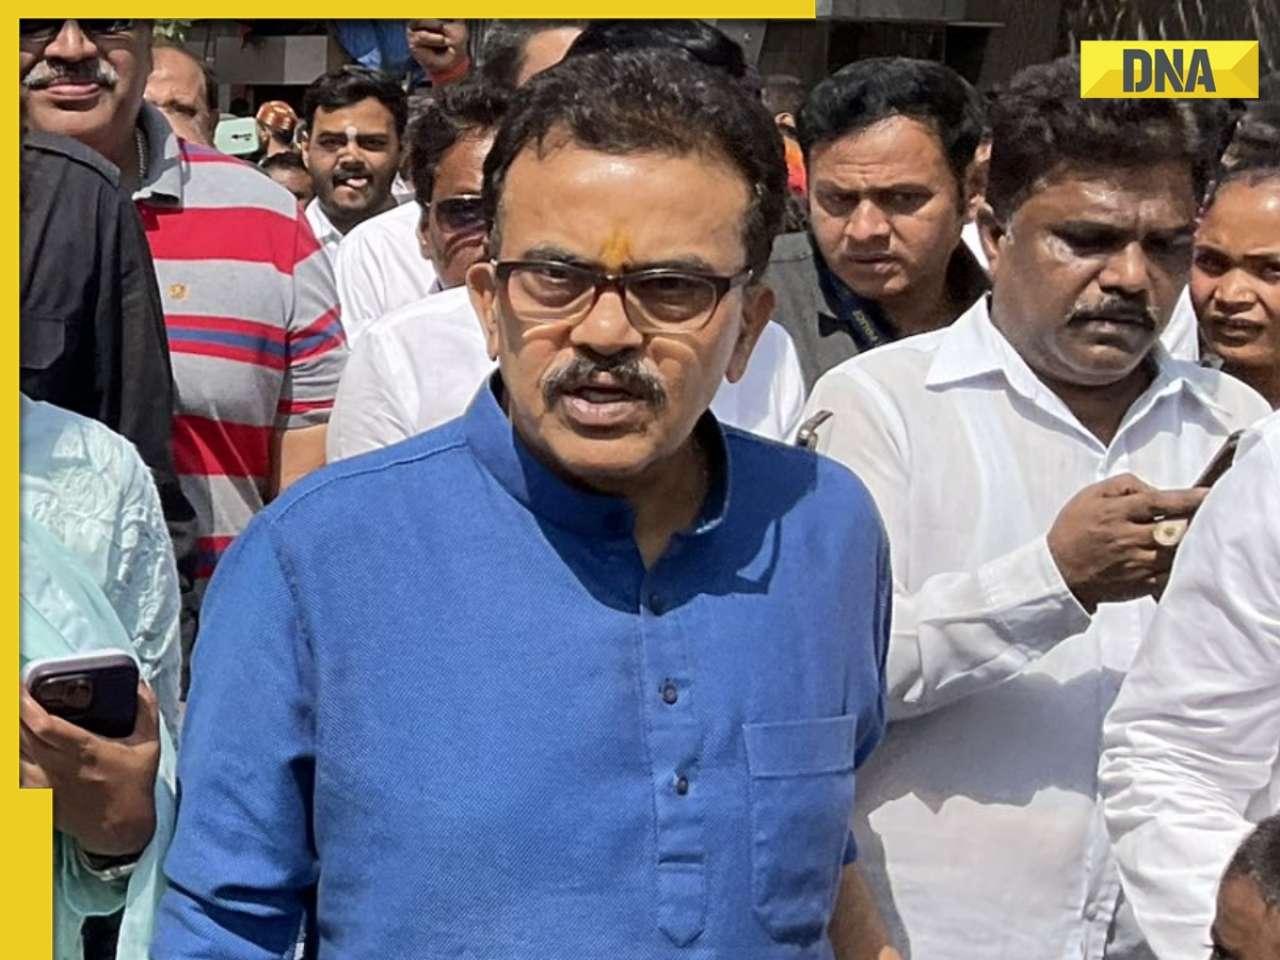 Sanjay Nirupam expelled from Congress for 6 years for 'indiscipline, anti-party statements'